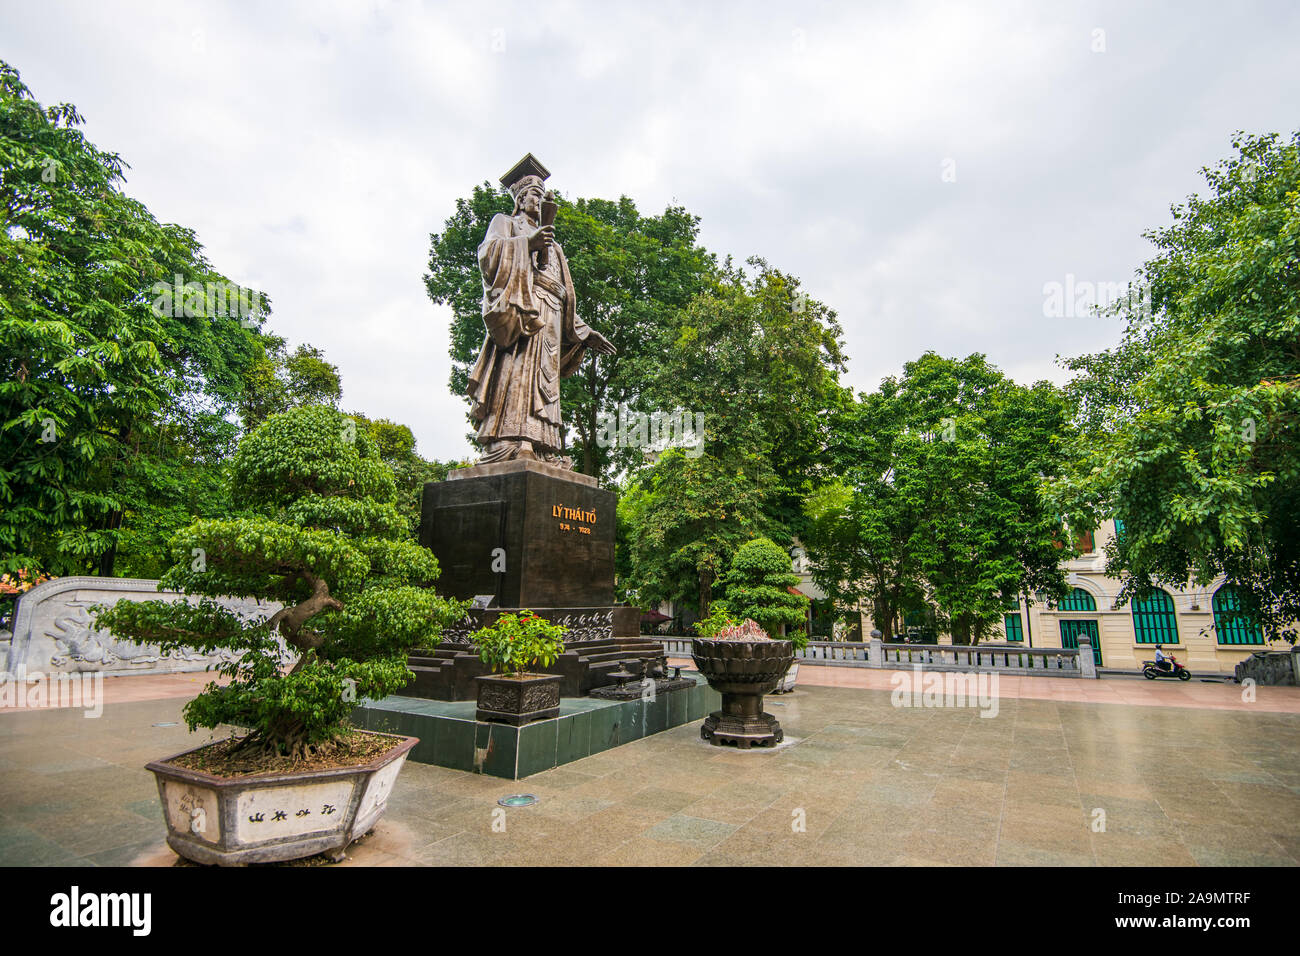 Statue of King Le Thai To in Hanoi, Capital of Vietnam Stock Photo